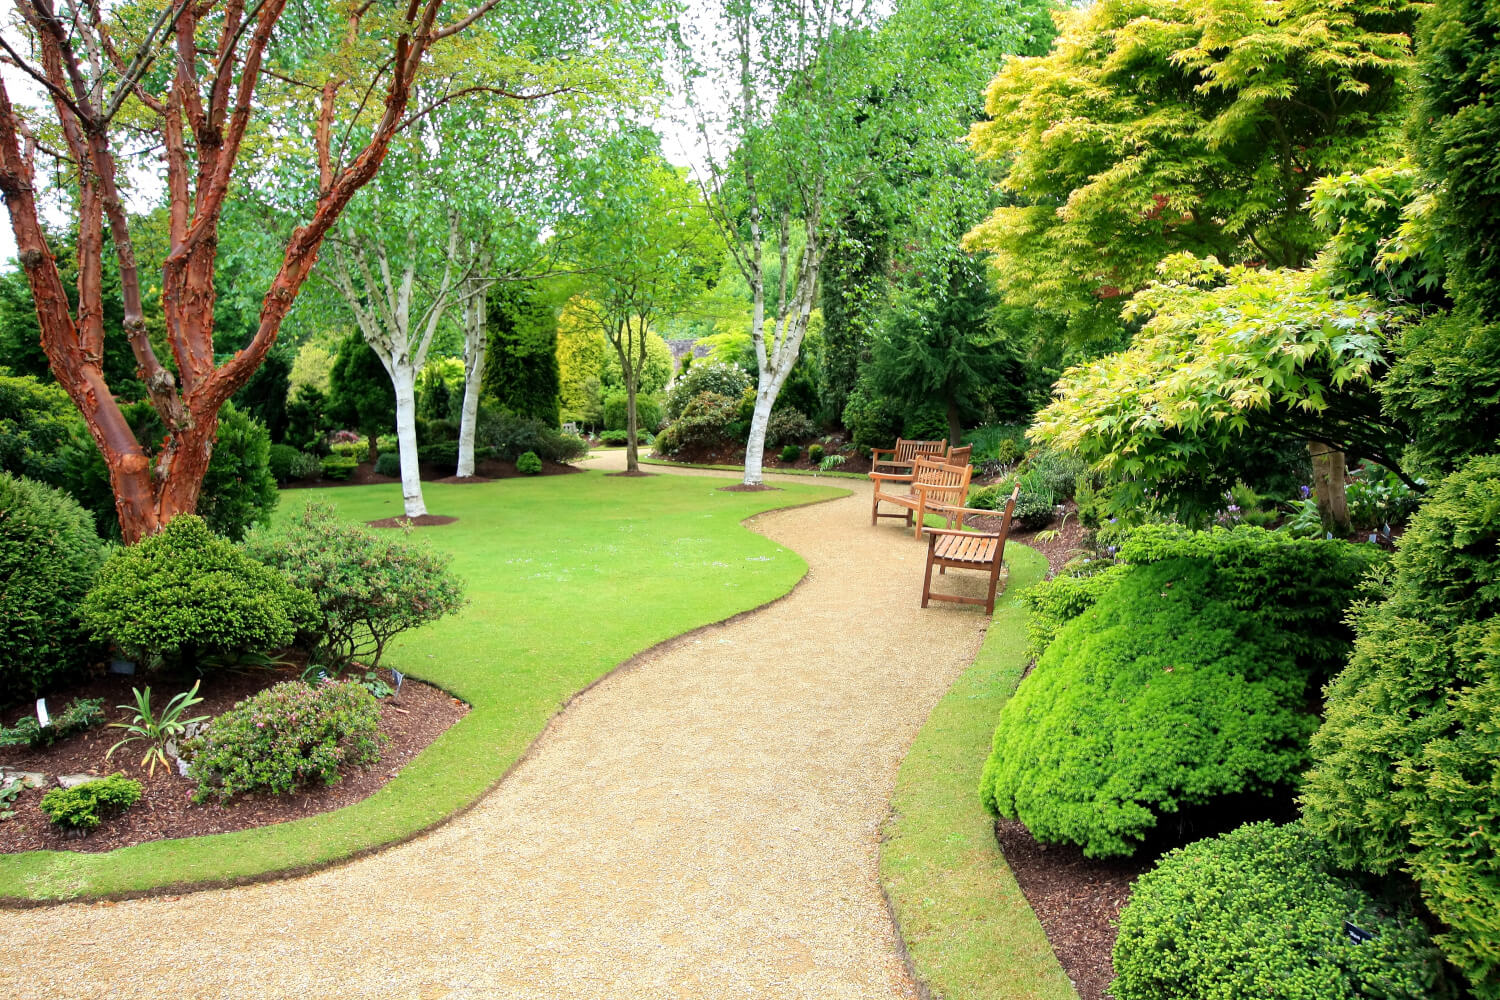 What does green social prescribing mean for the landscaping industry?